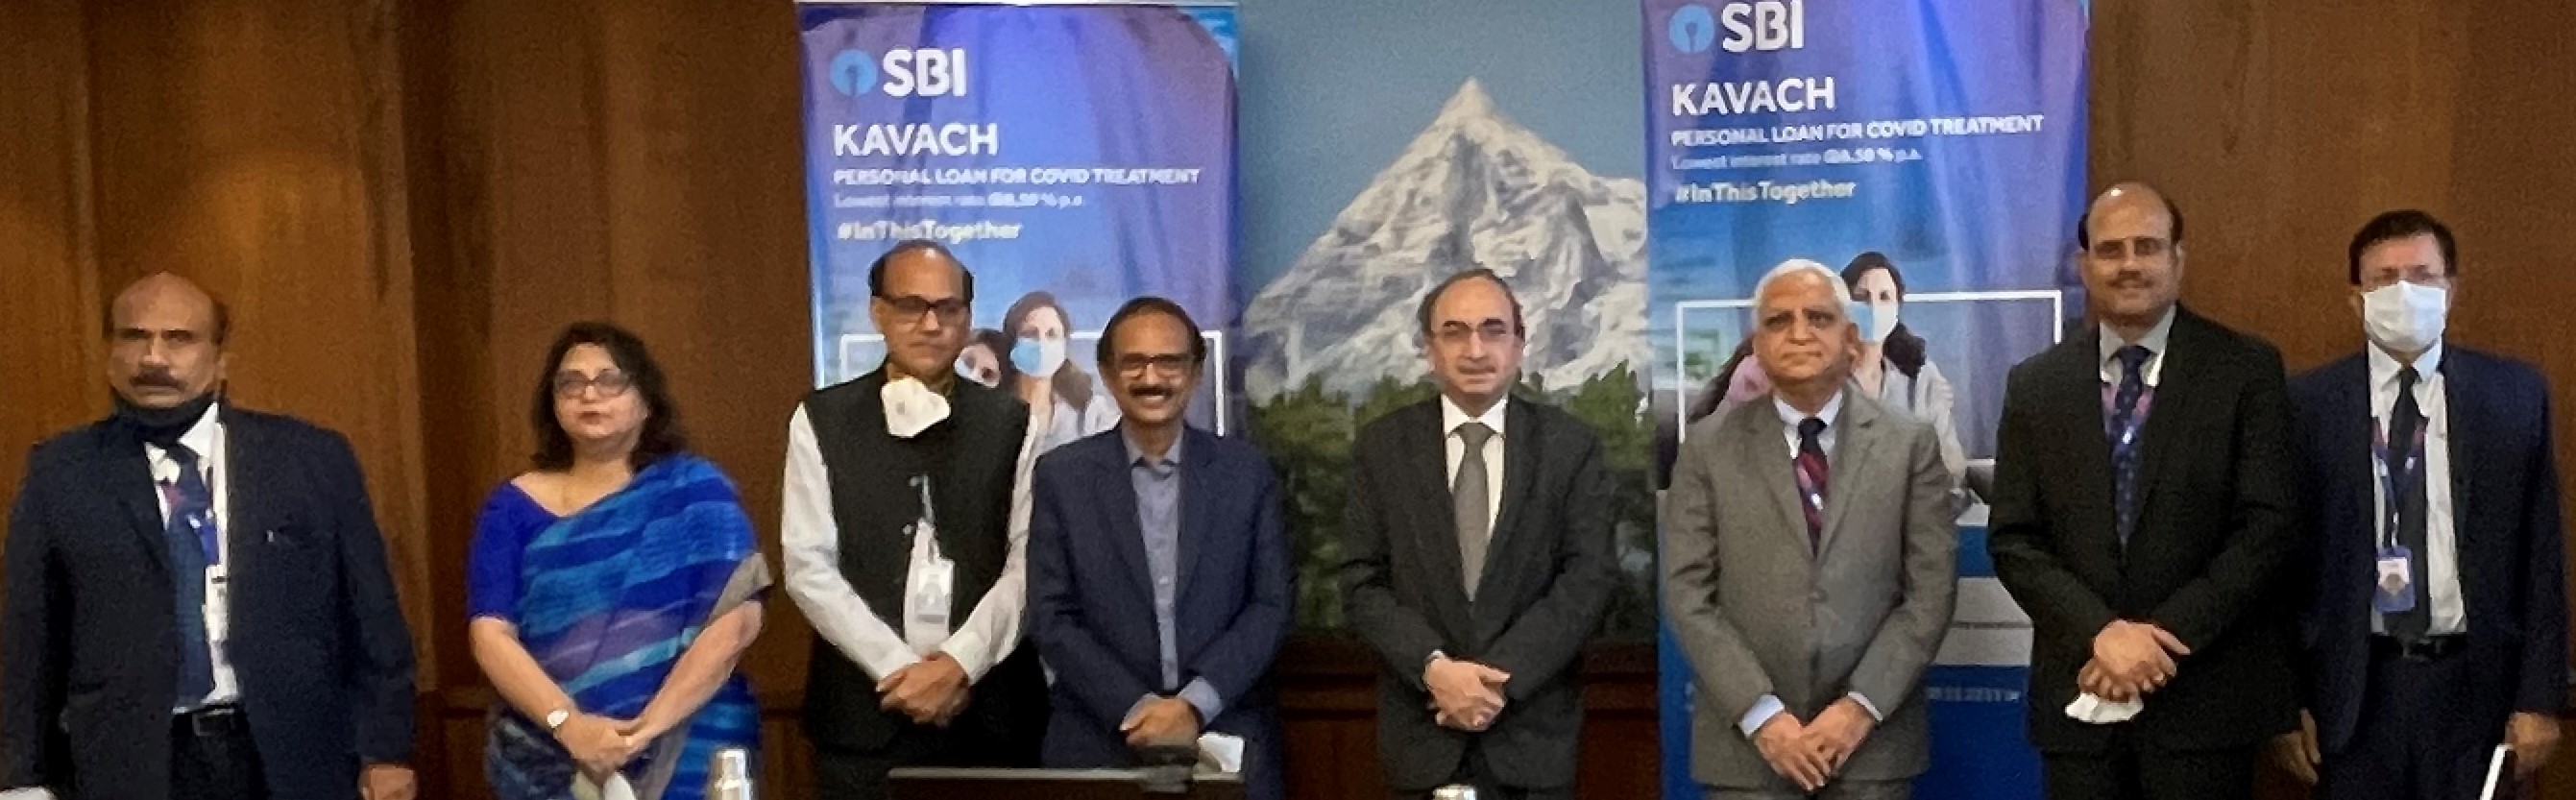 SBI launches ‘Kavach Personal Loan’ scheme for COVID patients